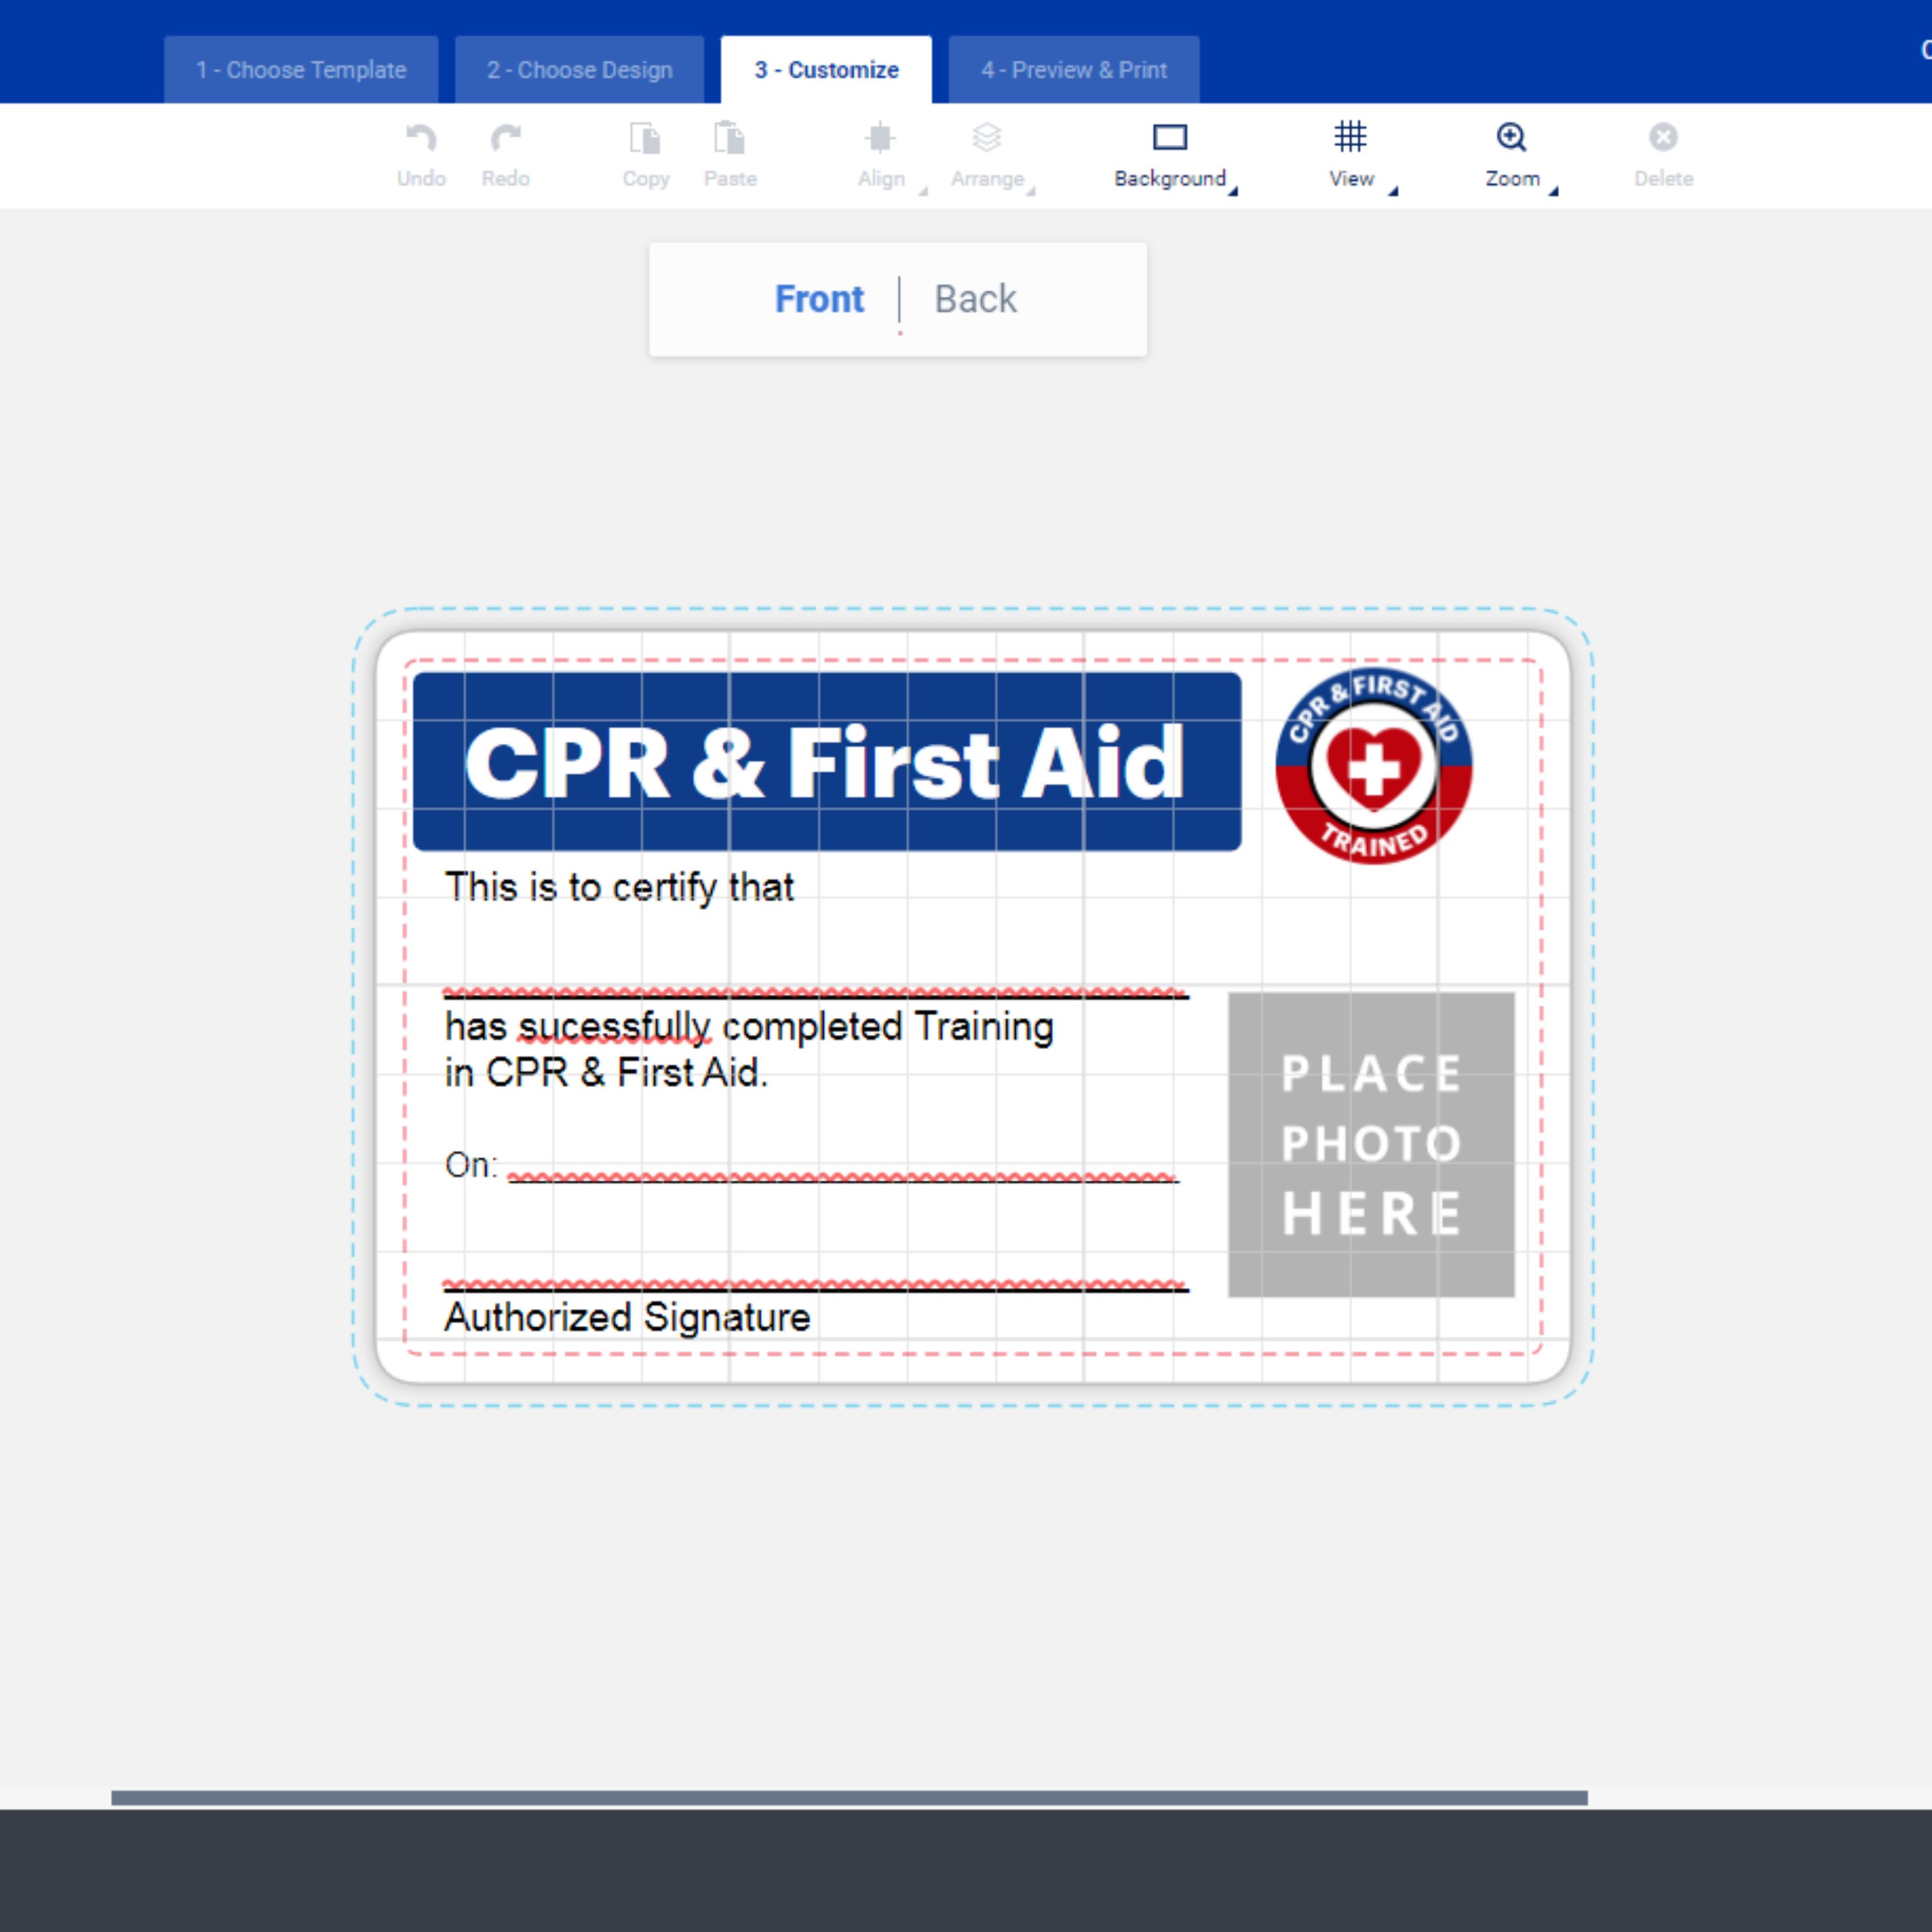 Free Avery template for a CPR and First Aid safety certification card employee ID card. The image is a screenshot of Avery Design and Print Online showing the template in the editor screen.